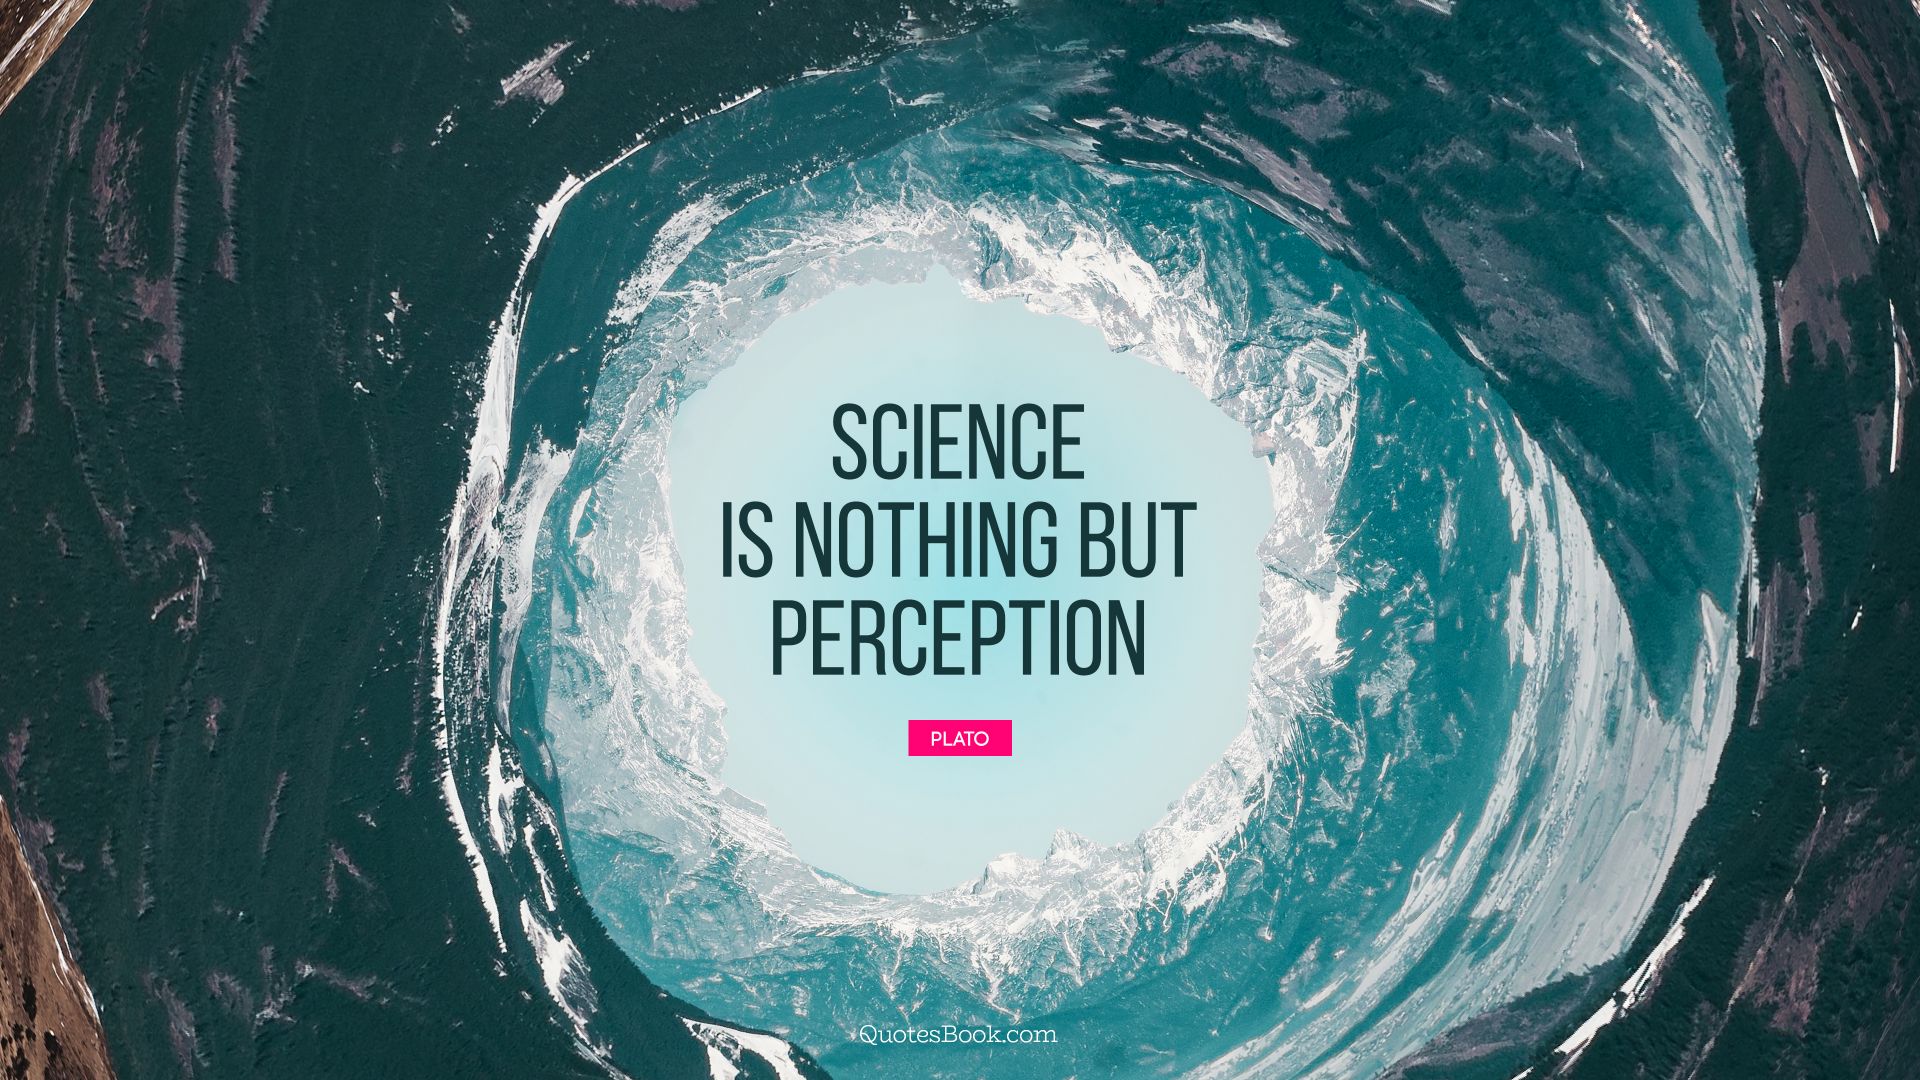 Science is nothing but perception. - Quote by Plato